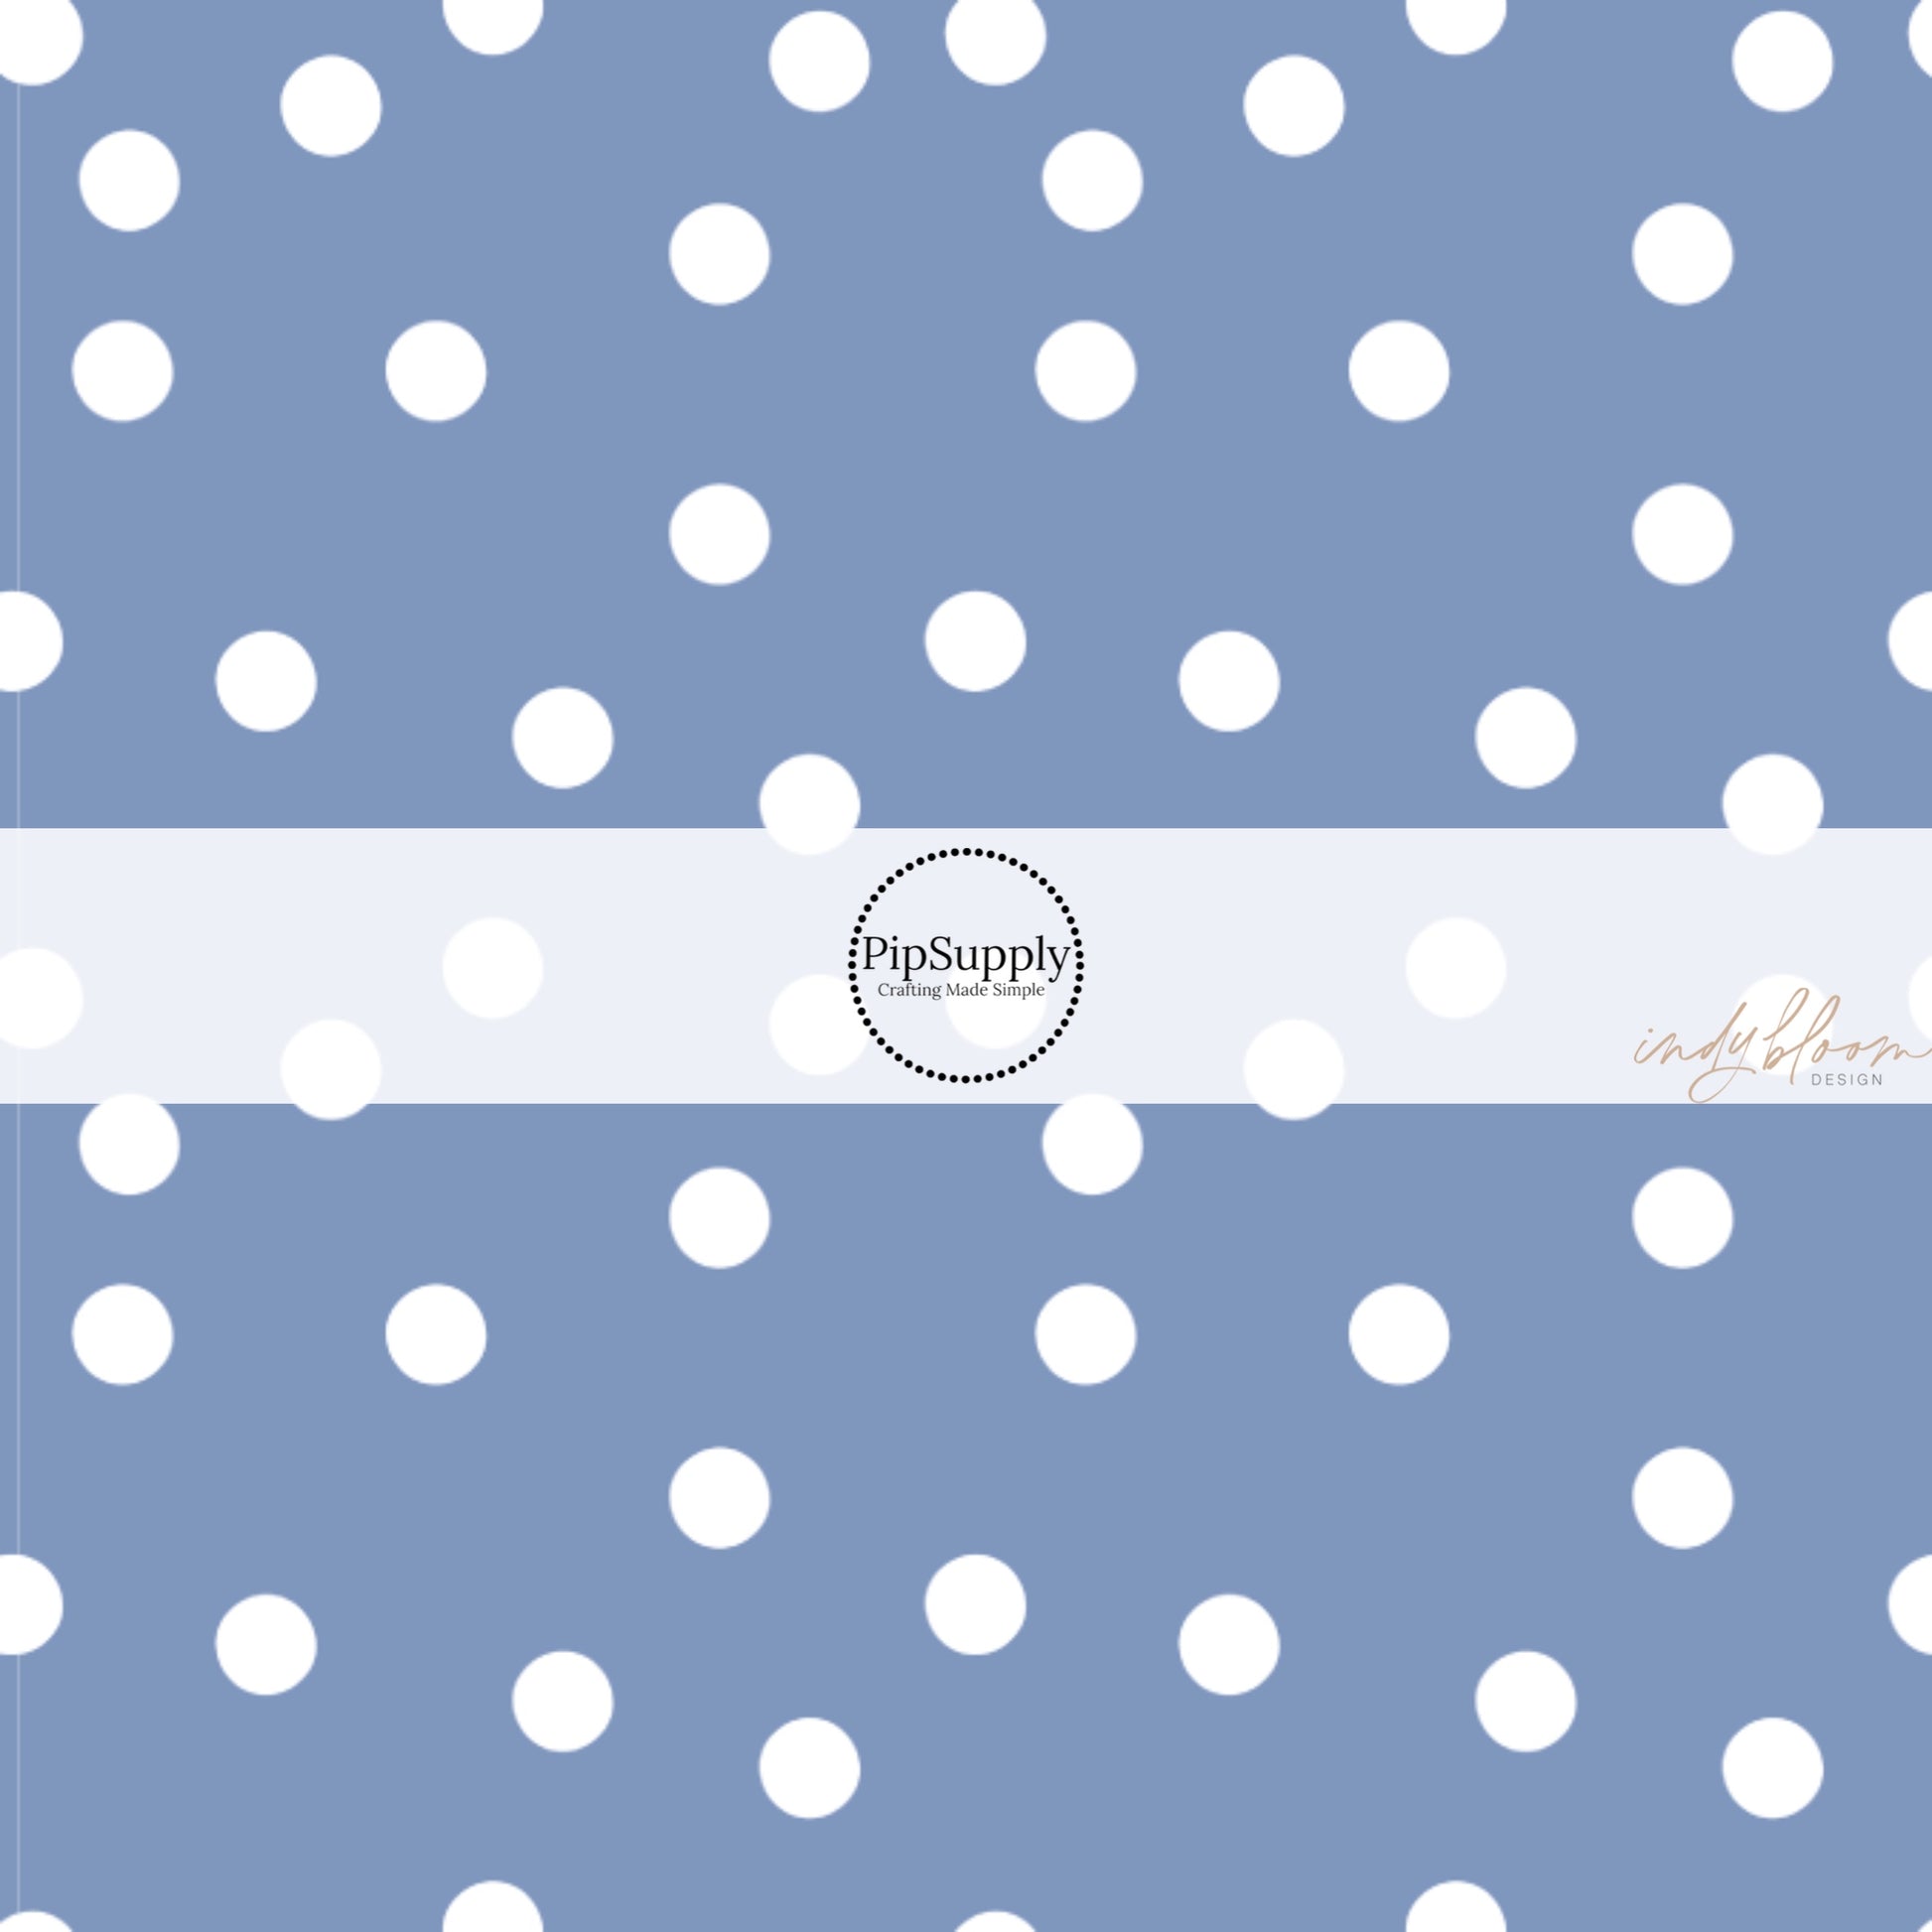 This summer fabric by the yard features cream dots on blue. This fun summer themed fabric can be used for all your sewing and crafting needs!